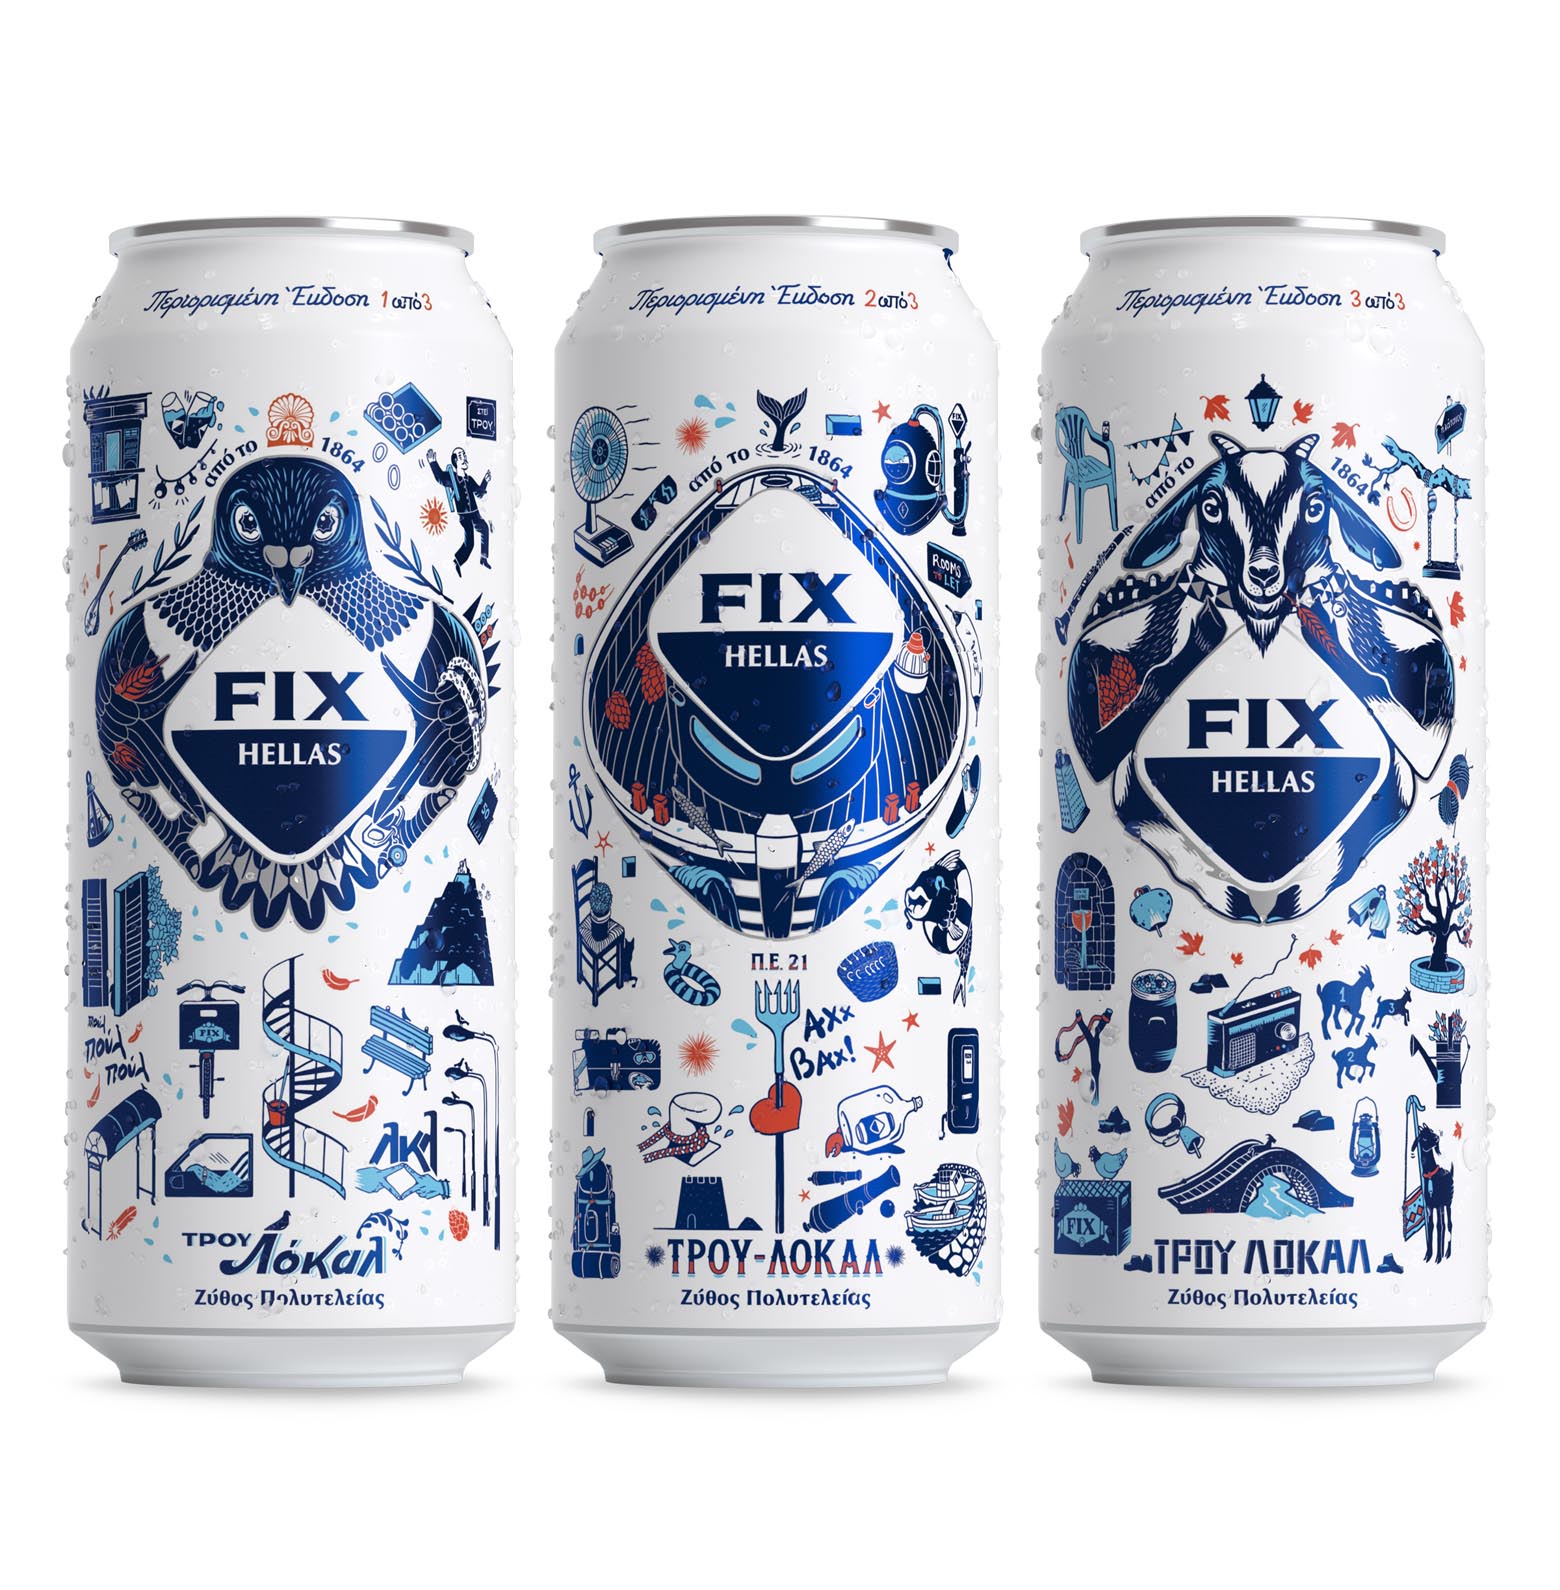 FIX Hellas Limited Edition Packaging by Luminous Design